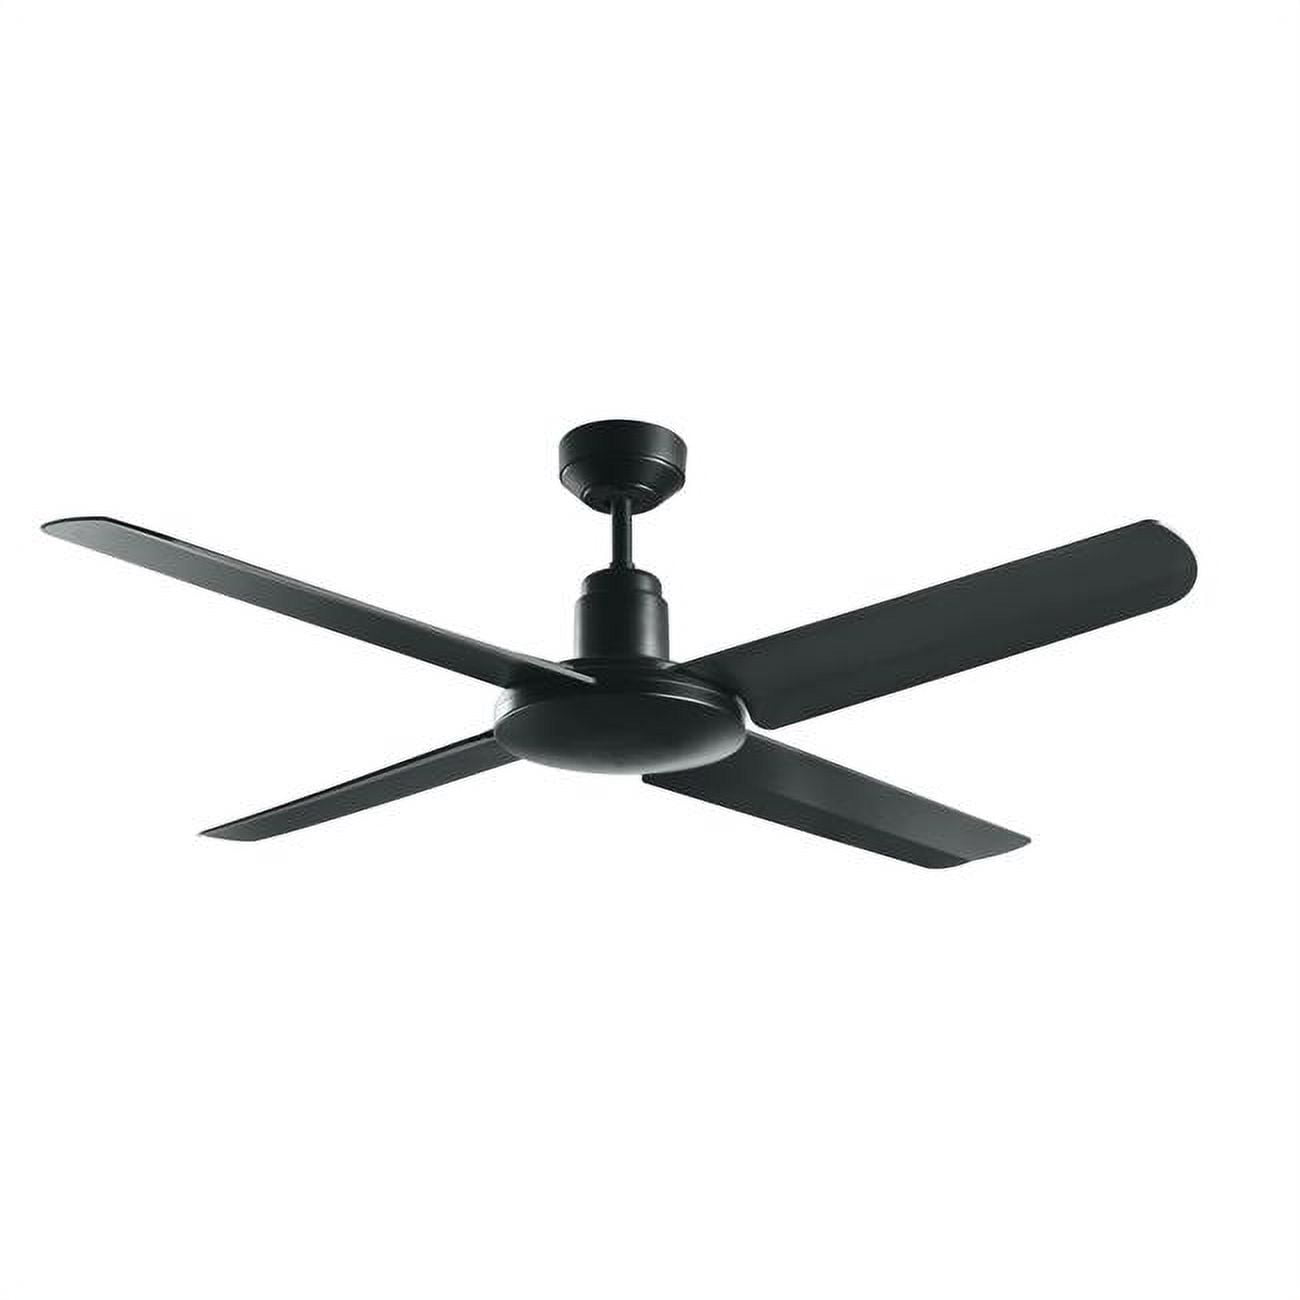 Picture of Lucci Air 21302601 Lucci Air Nautilus Black With Black Blades 52-inch Ceiling Fan